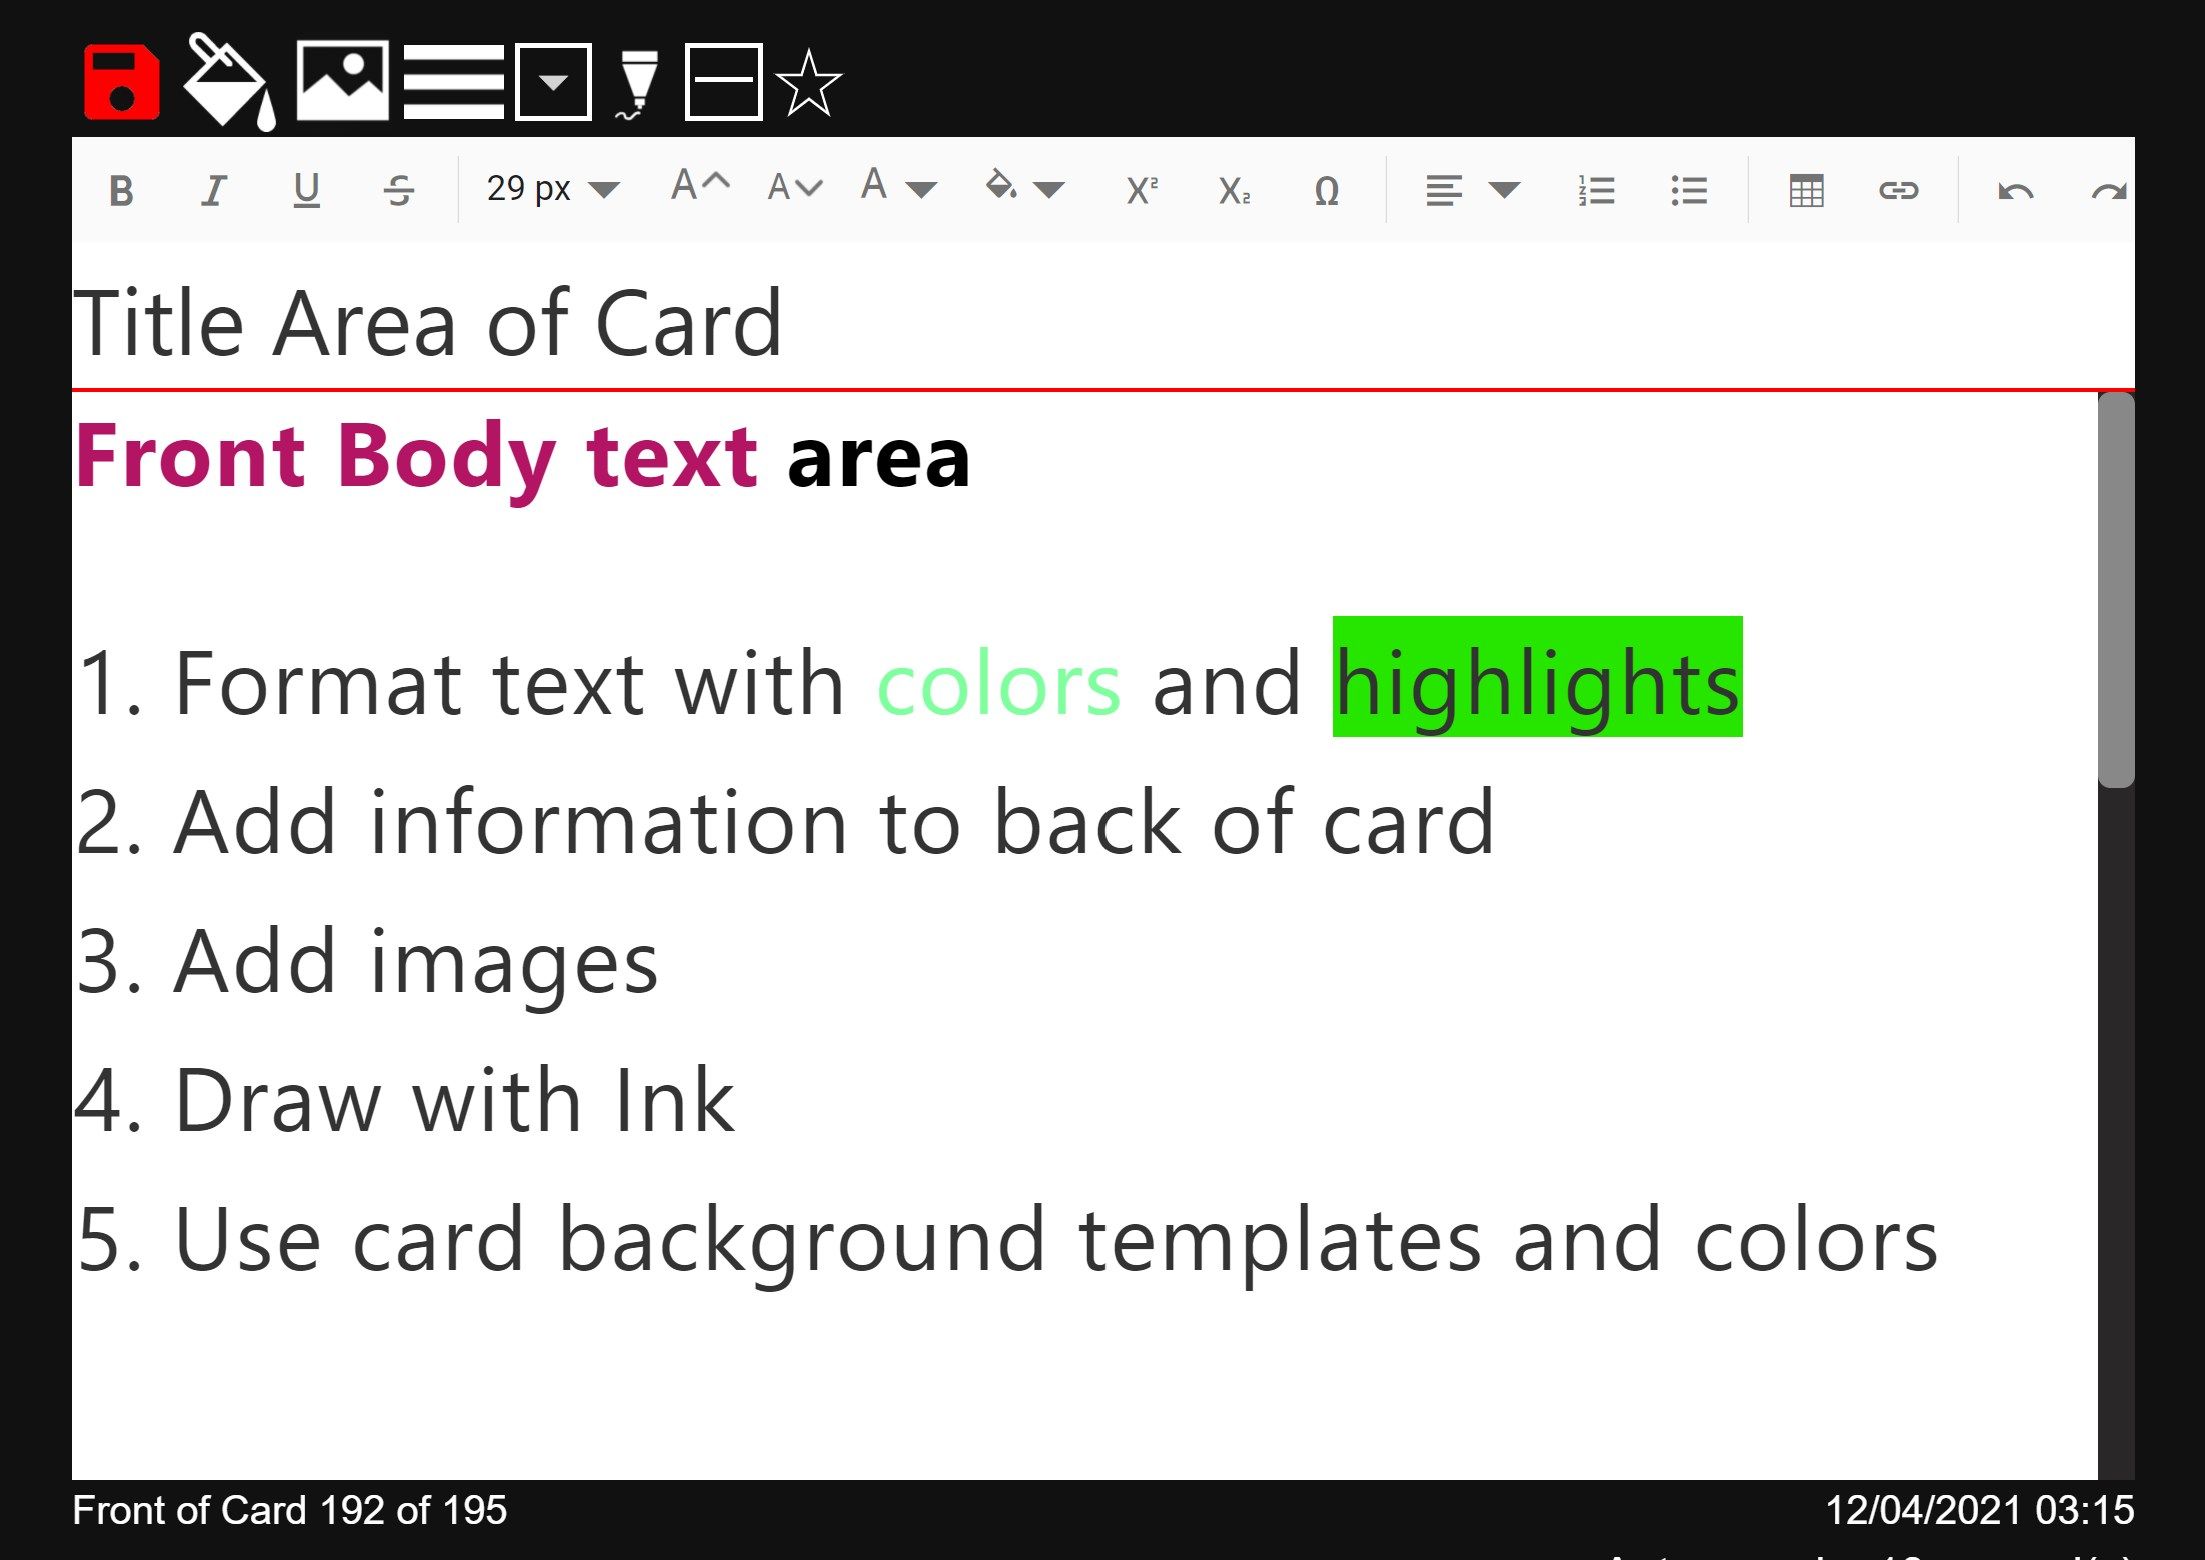 Capture rich text on cards - title, front and back areas - just like a real index card!